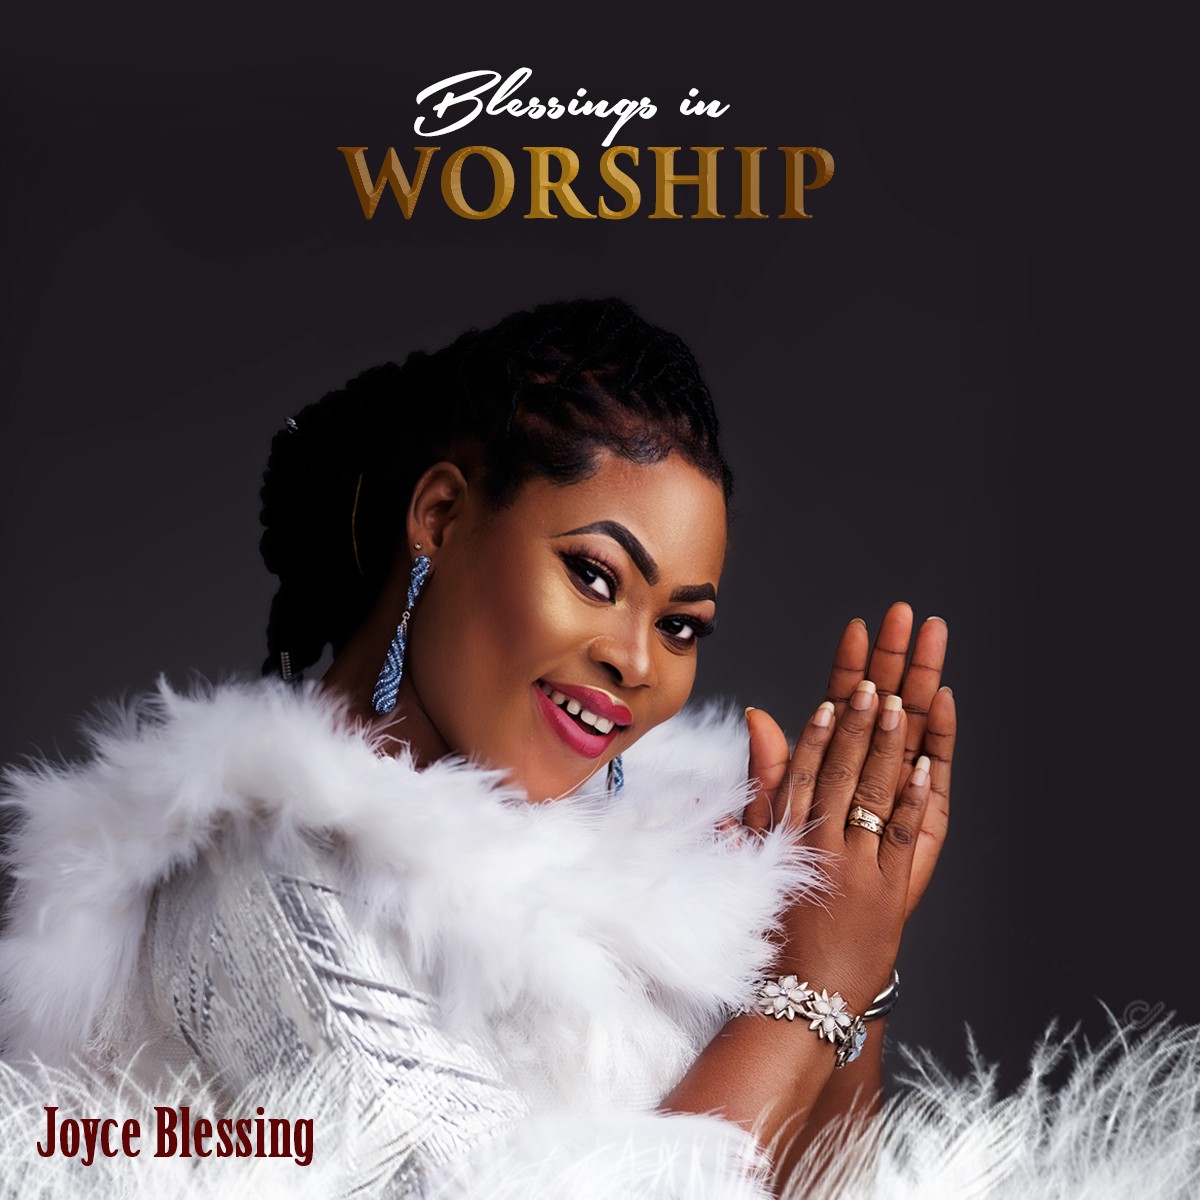 Joyce Blessing set to release 6th album, Blessings in Worship